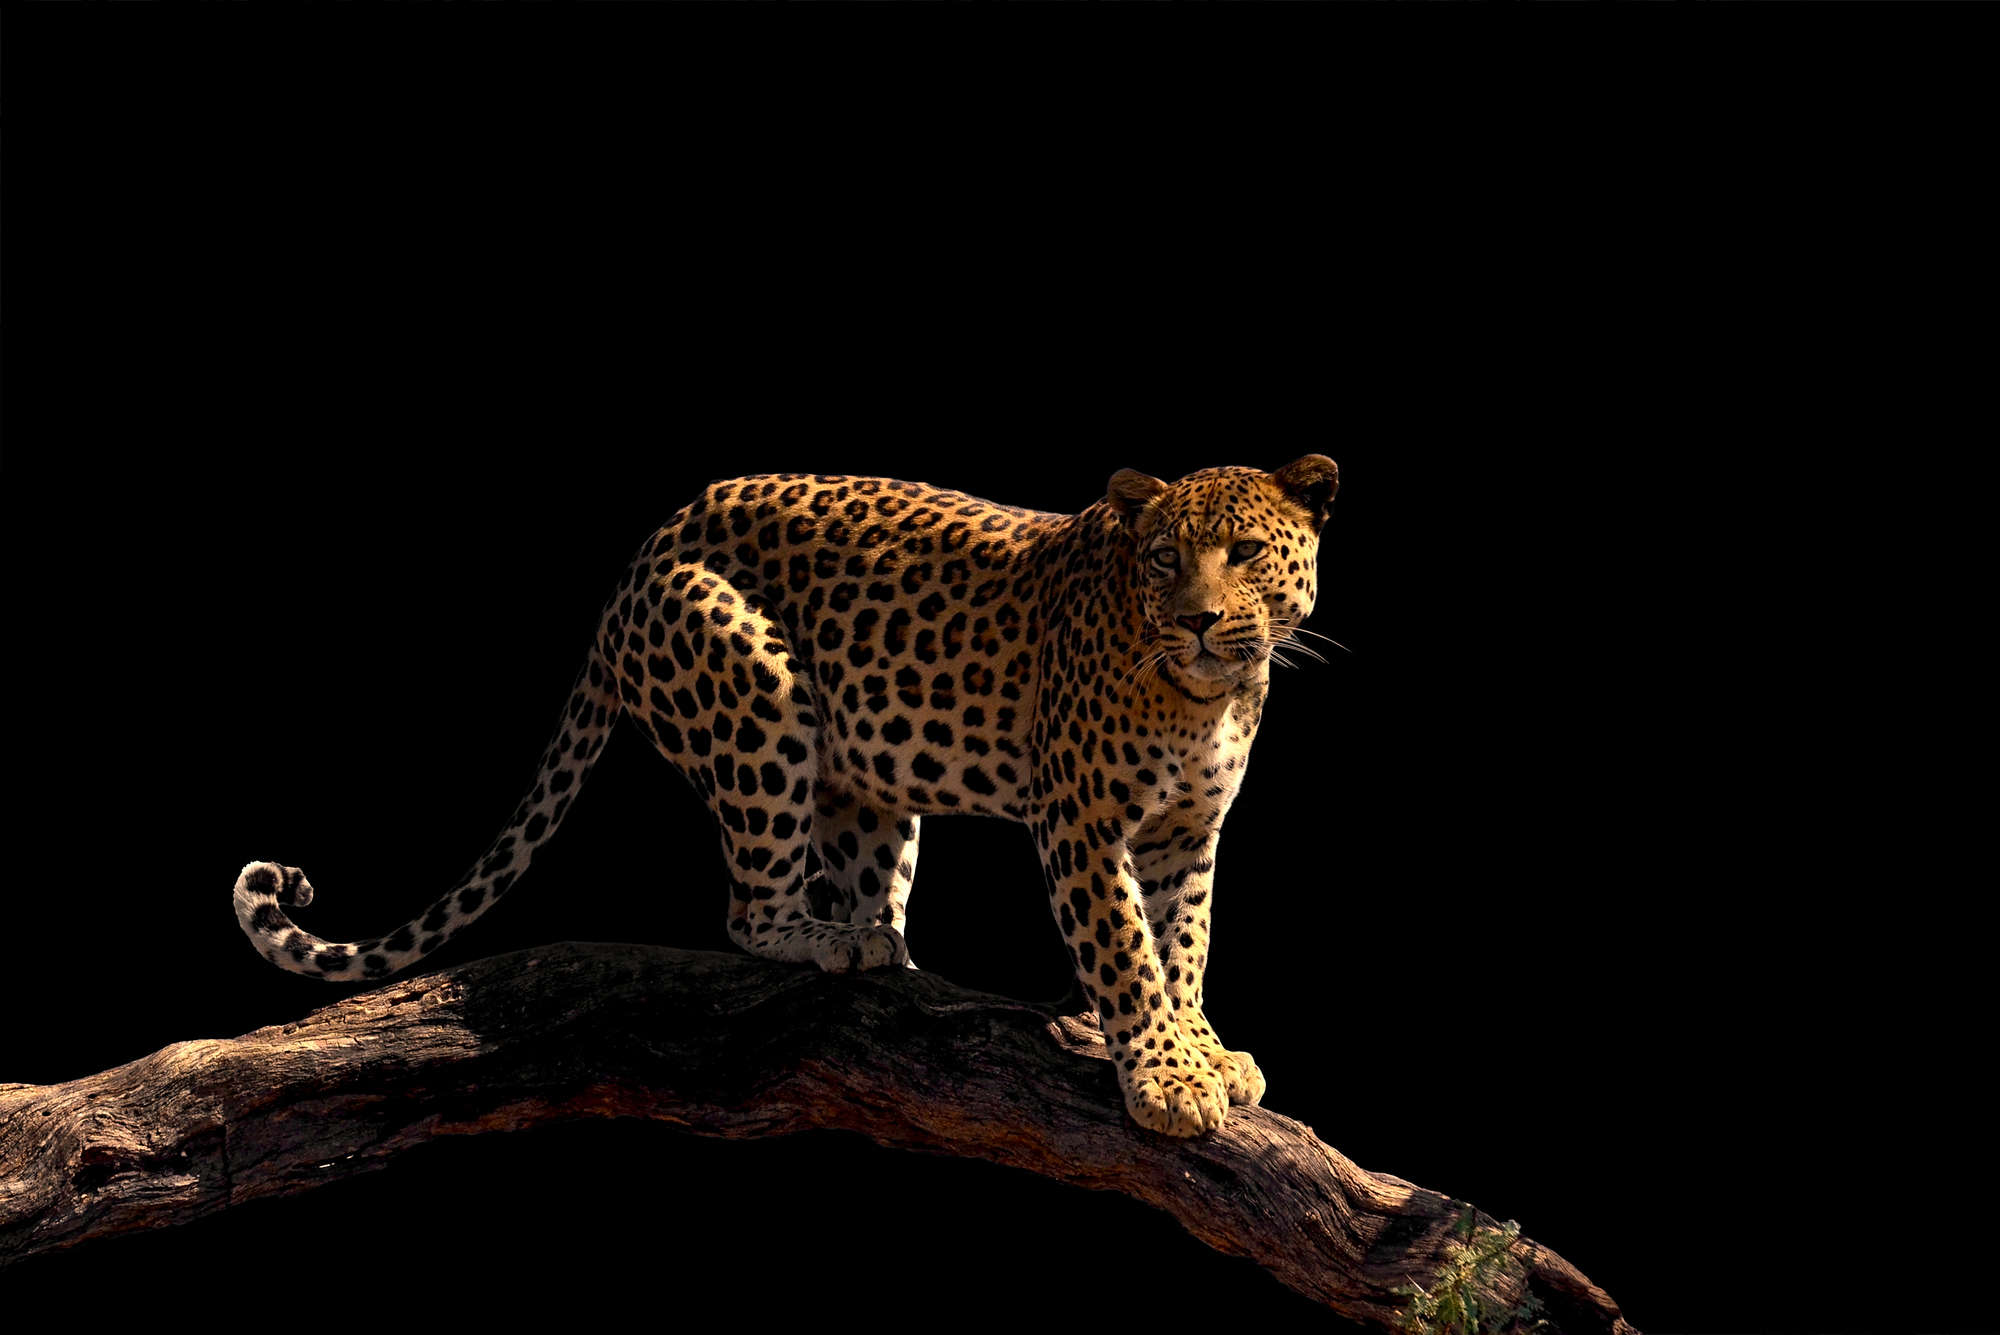             Leopard mural standing on a branch on matte smooth vinyl
        